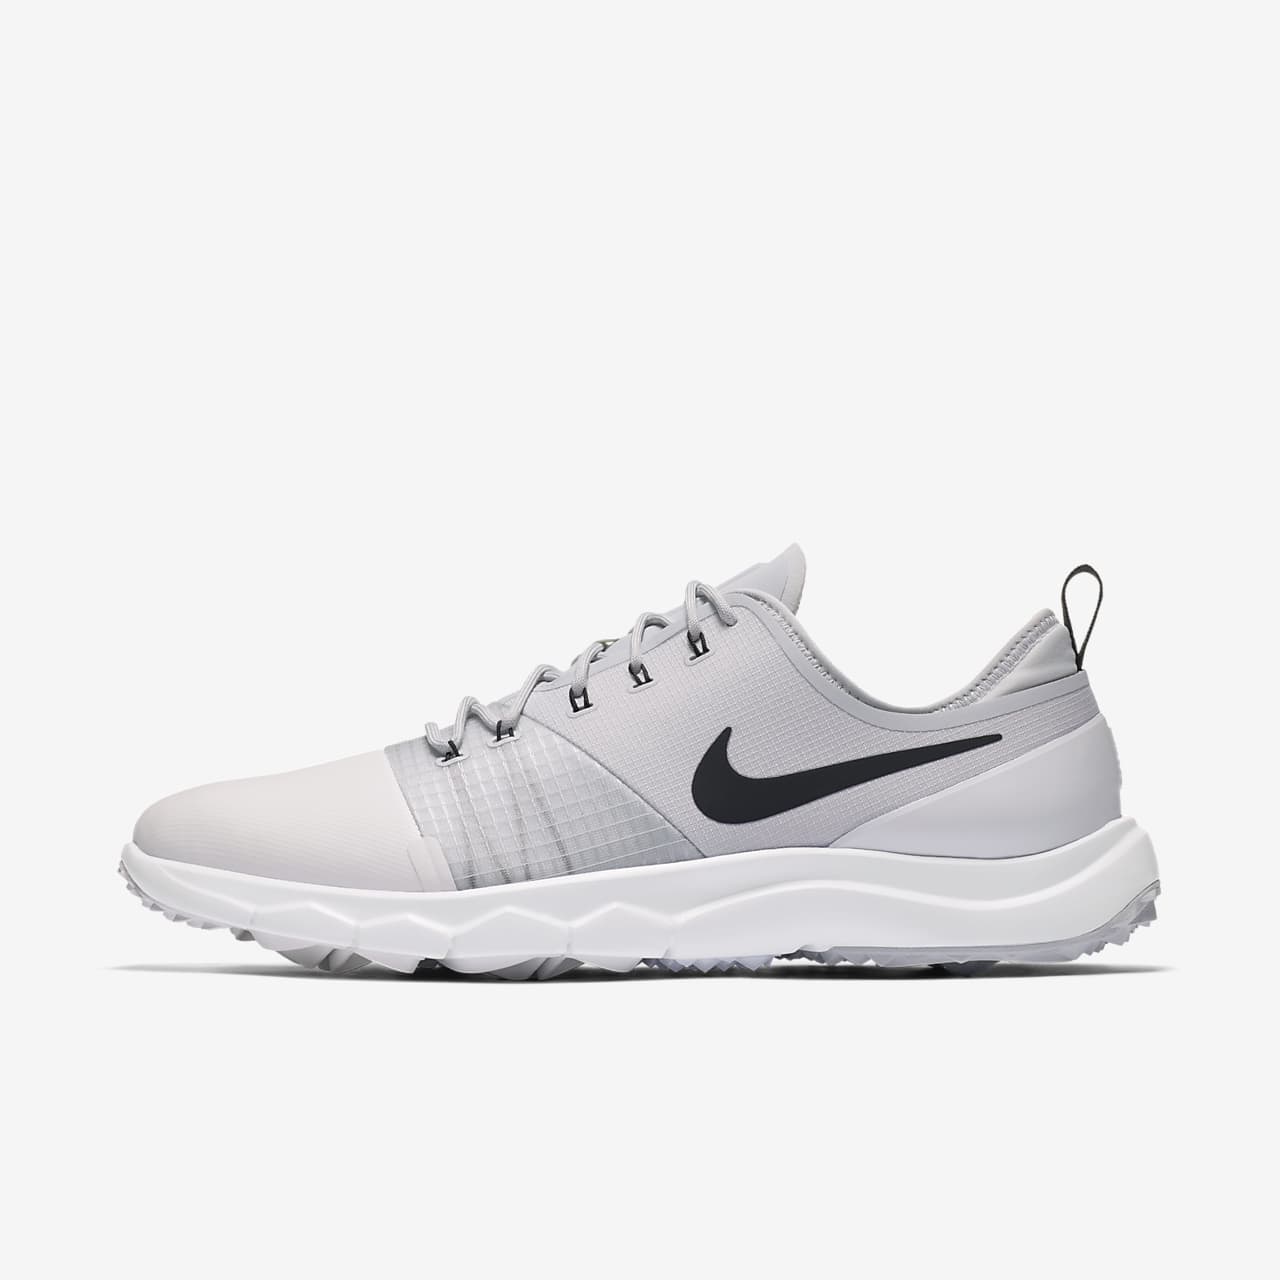 nike f1 golf shoes online -